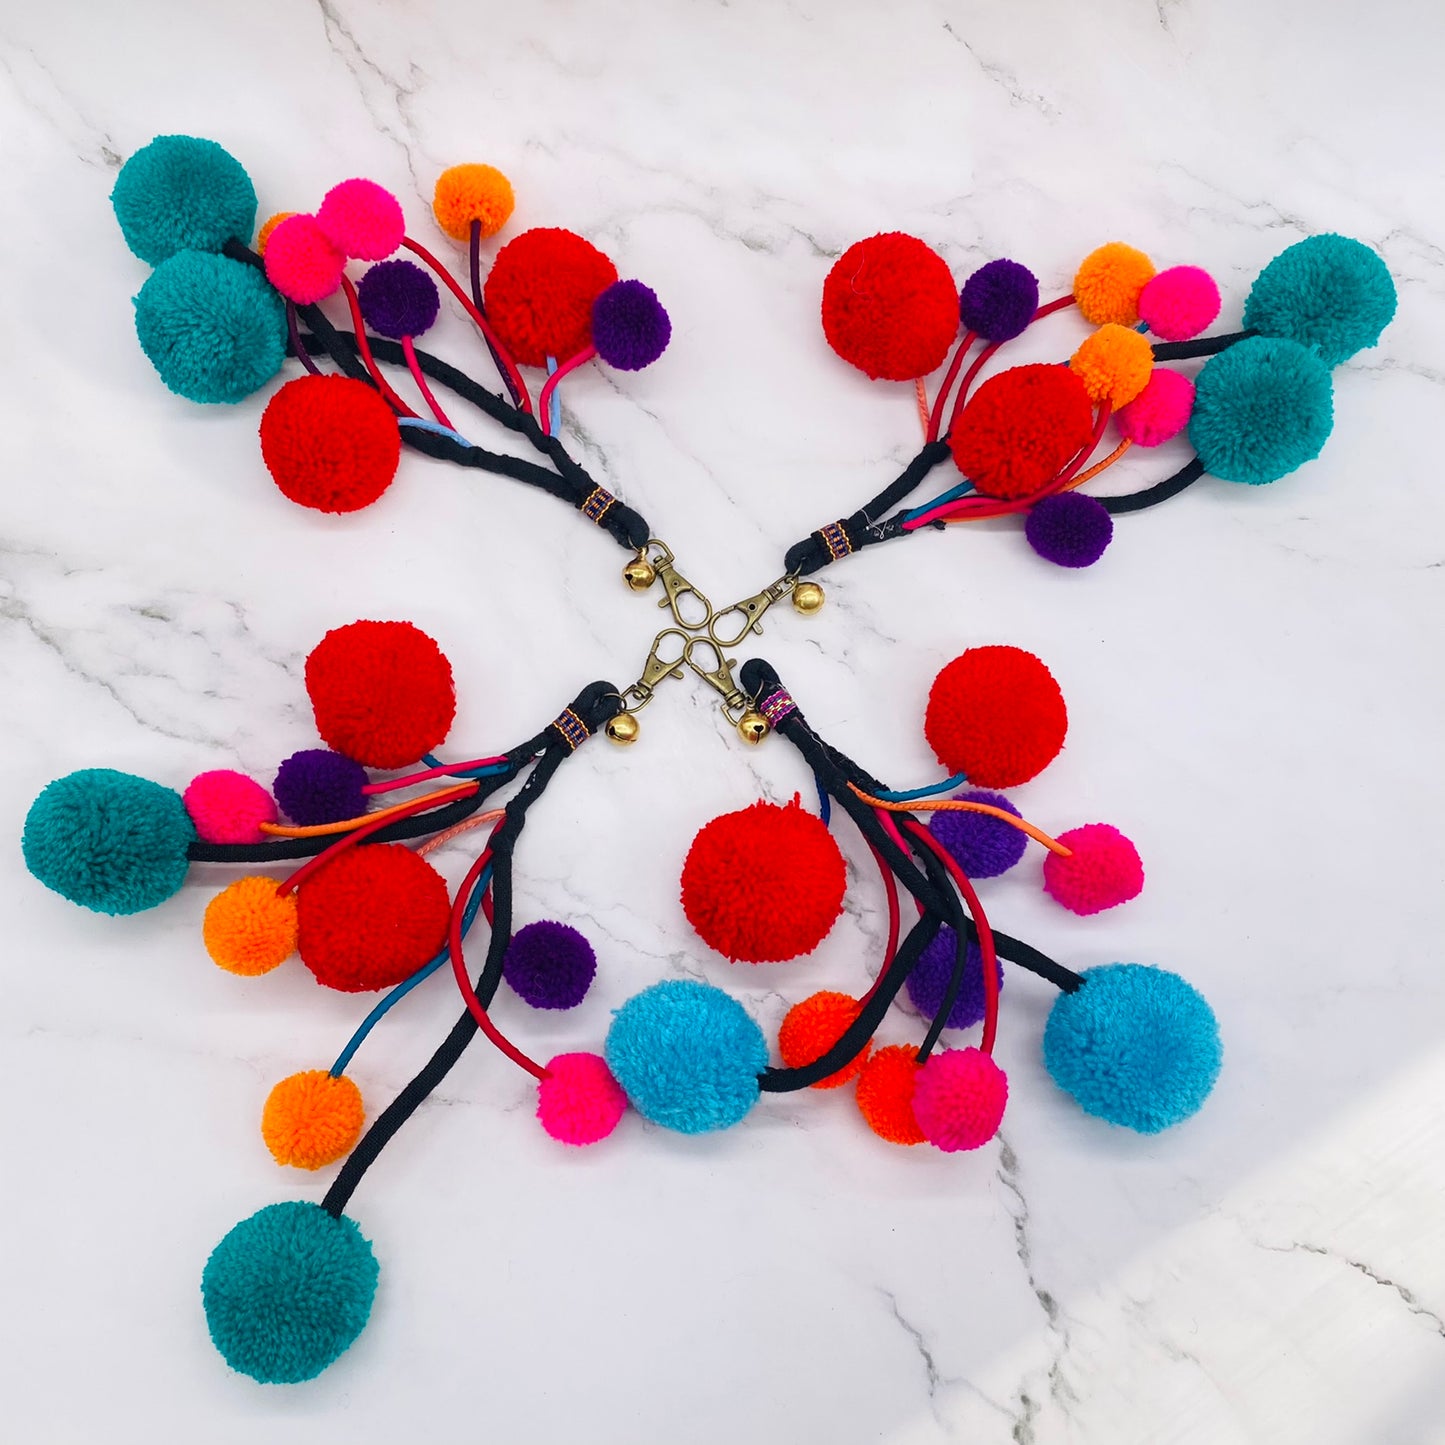 Pom Pom Keychain, Colorful Keychain, Handmade Keychain, Bag Accessories, Gift For Her, Soft Bag Hanging, Cute Key ring, Bag Charm